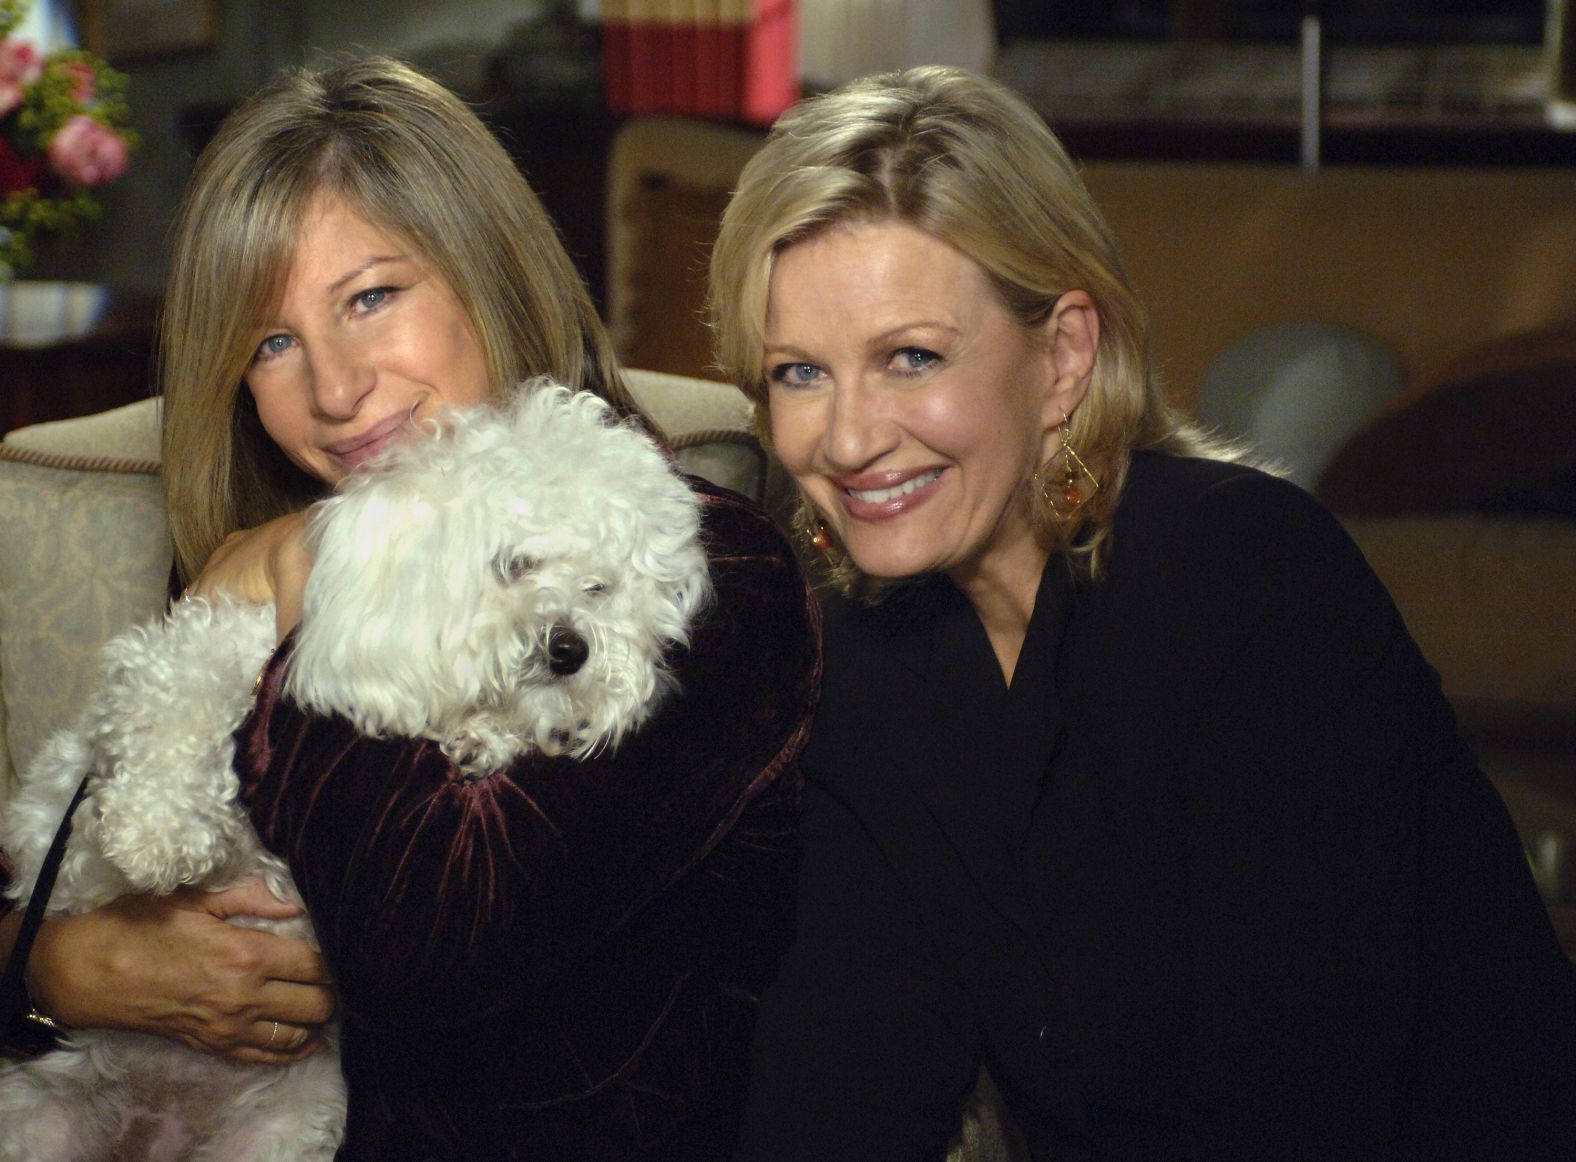 Streisand holds her dog Samantha while on set for an interview with Diane Sawyer in 2005. Streisand <a href="index.php?page=&url=https%3A%2F%2Fvariety.com%2F2018%2Ffilm%2Fnews%2Fbarbra-streisand-oscars-sexism-in-hollywood-clone-dogs-1202710585%2F" target="_blank">revealed to Variety Magazine</a> in 2018 that two of her dogs were cloned using Samantha's cells.